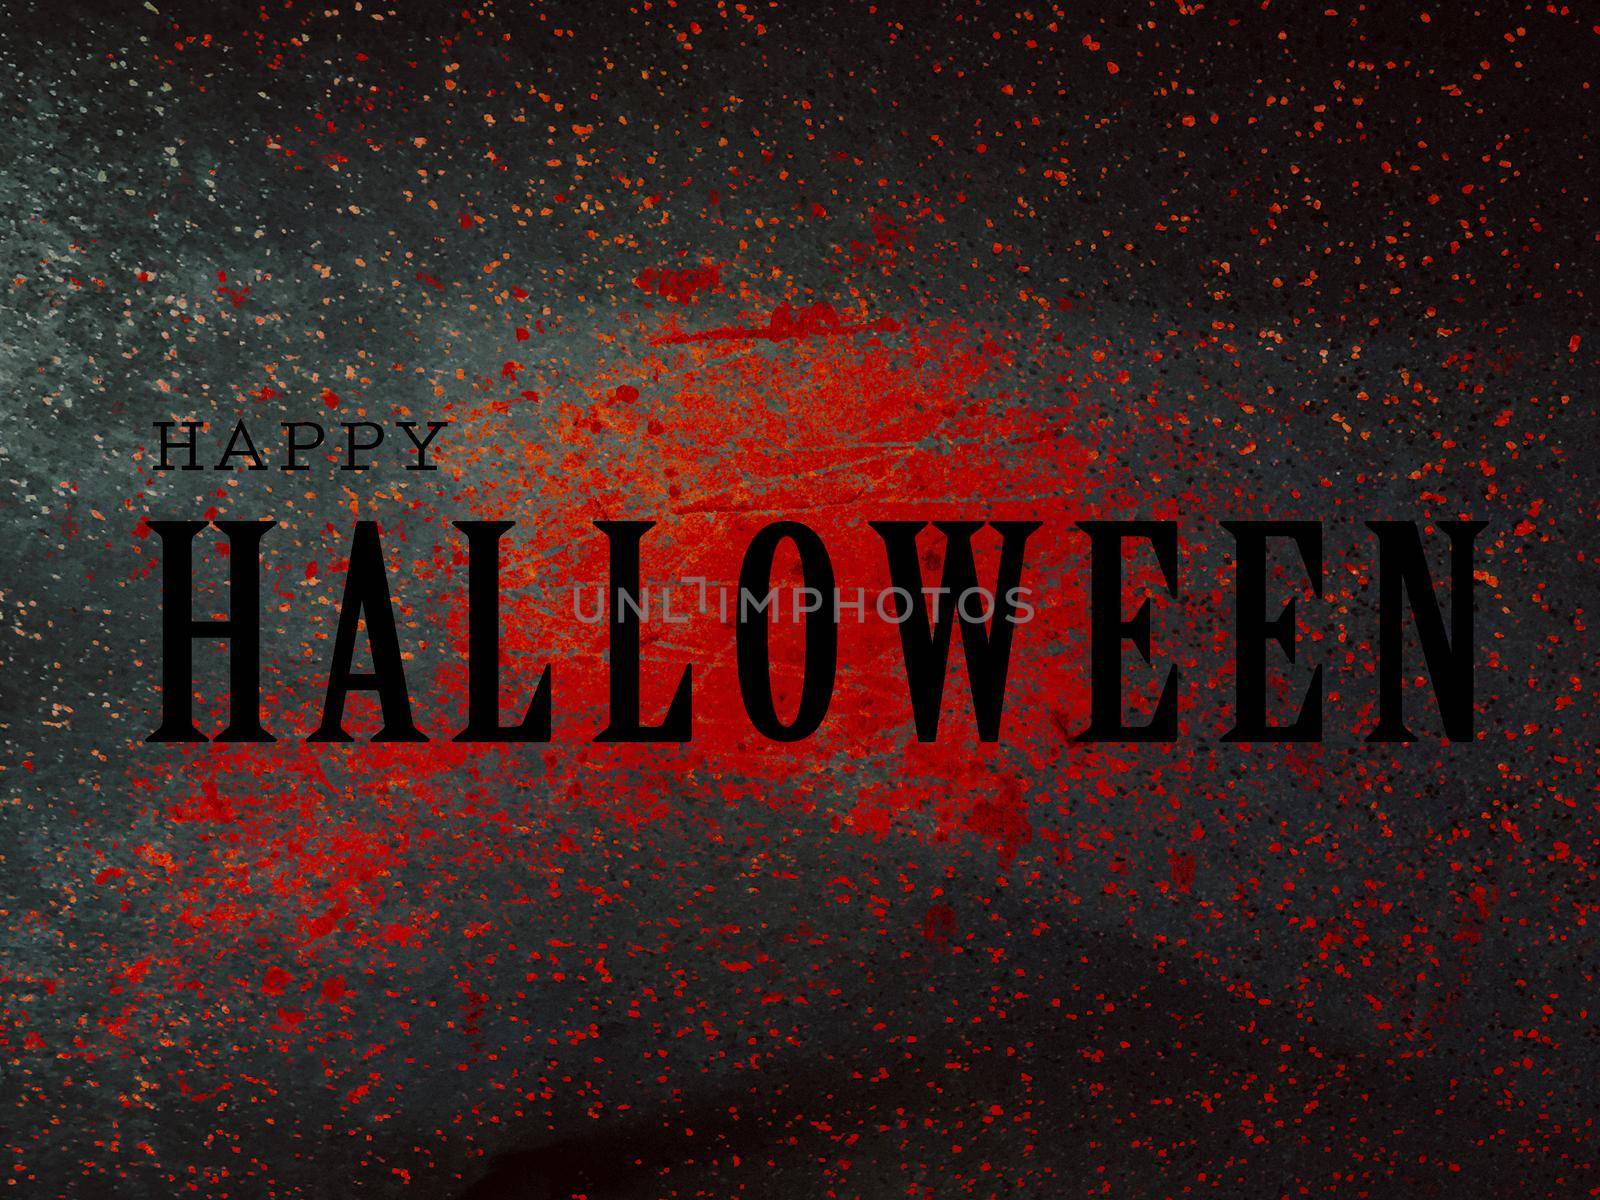 Happy Halloween word and bloody splash background illustration by Yoopho